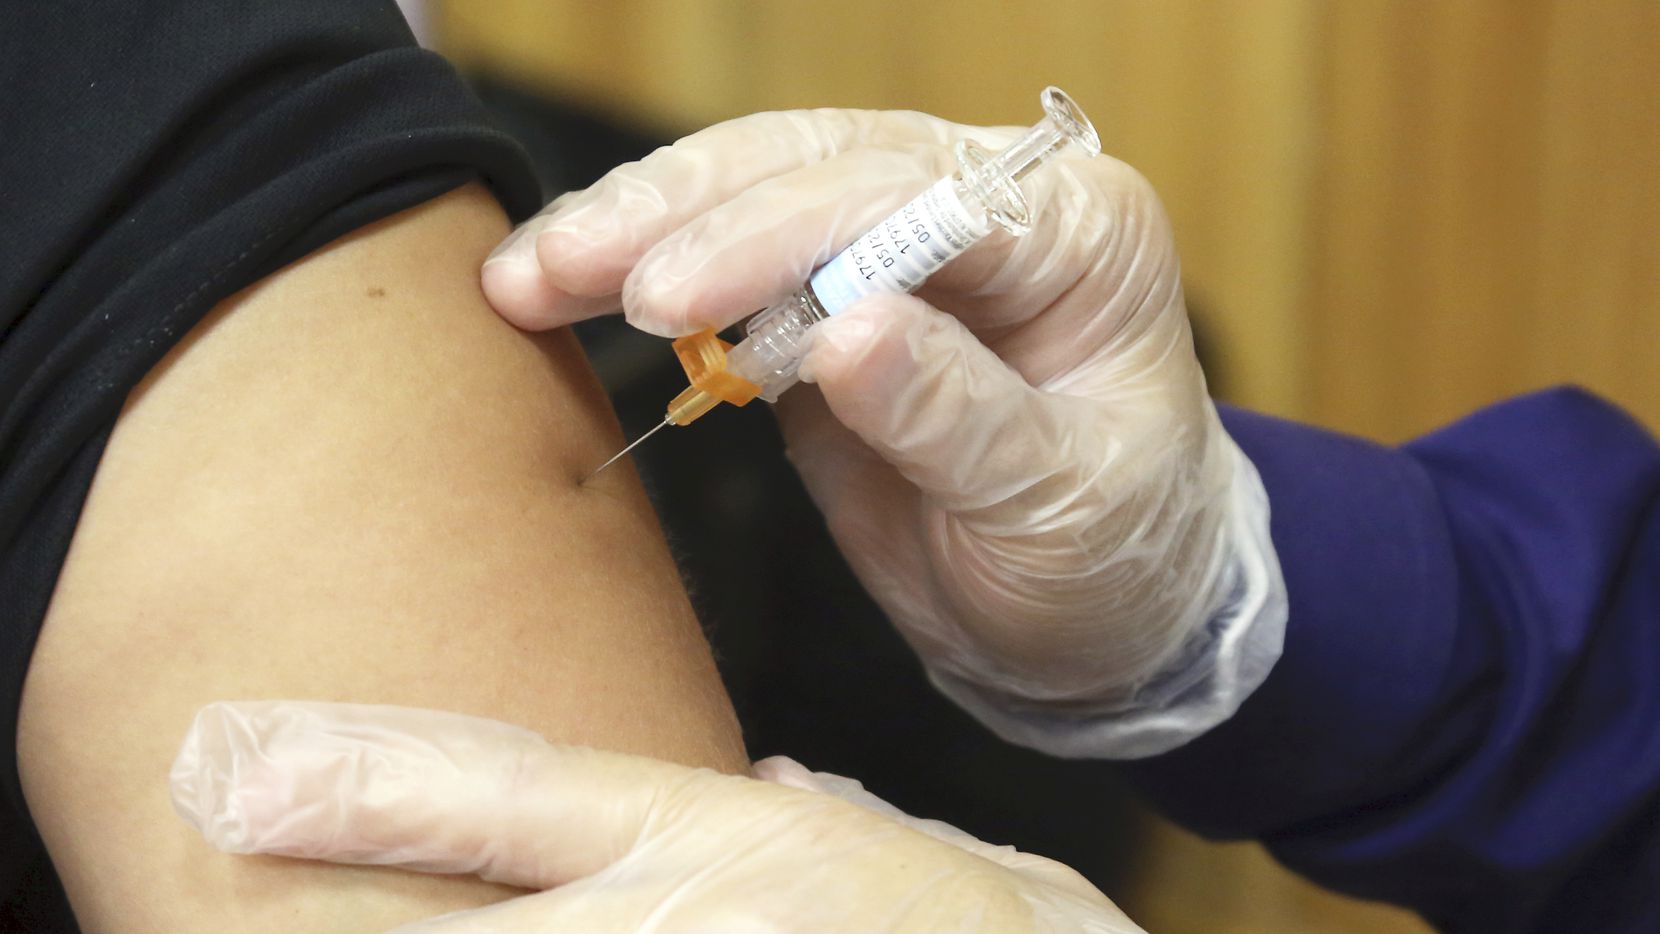 Garland ISD wants every student to get a flu shot, and here’s how some